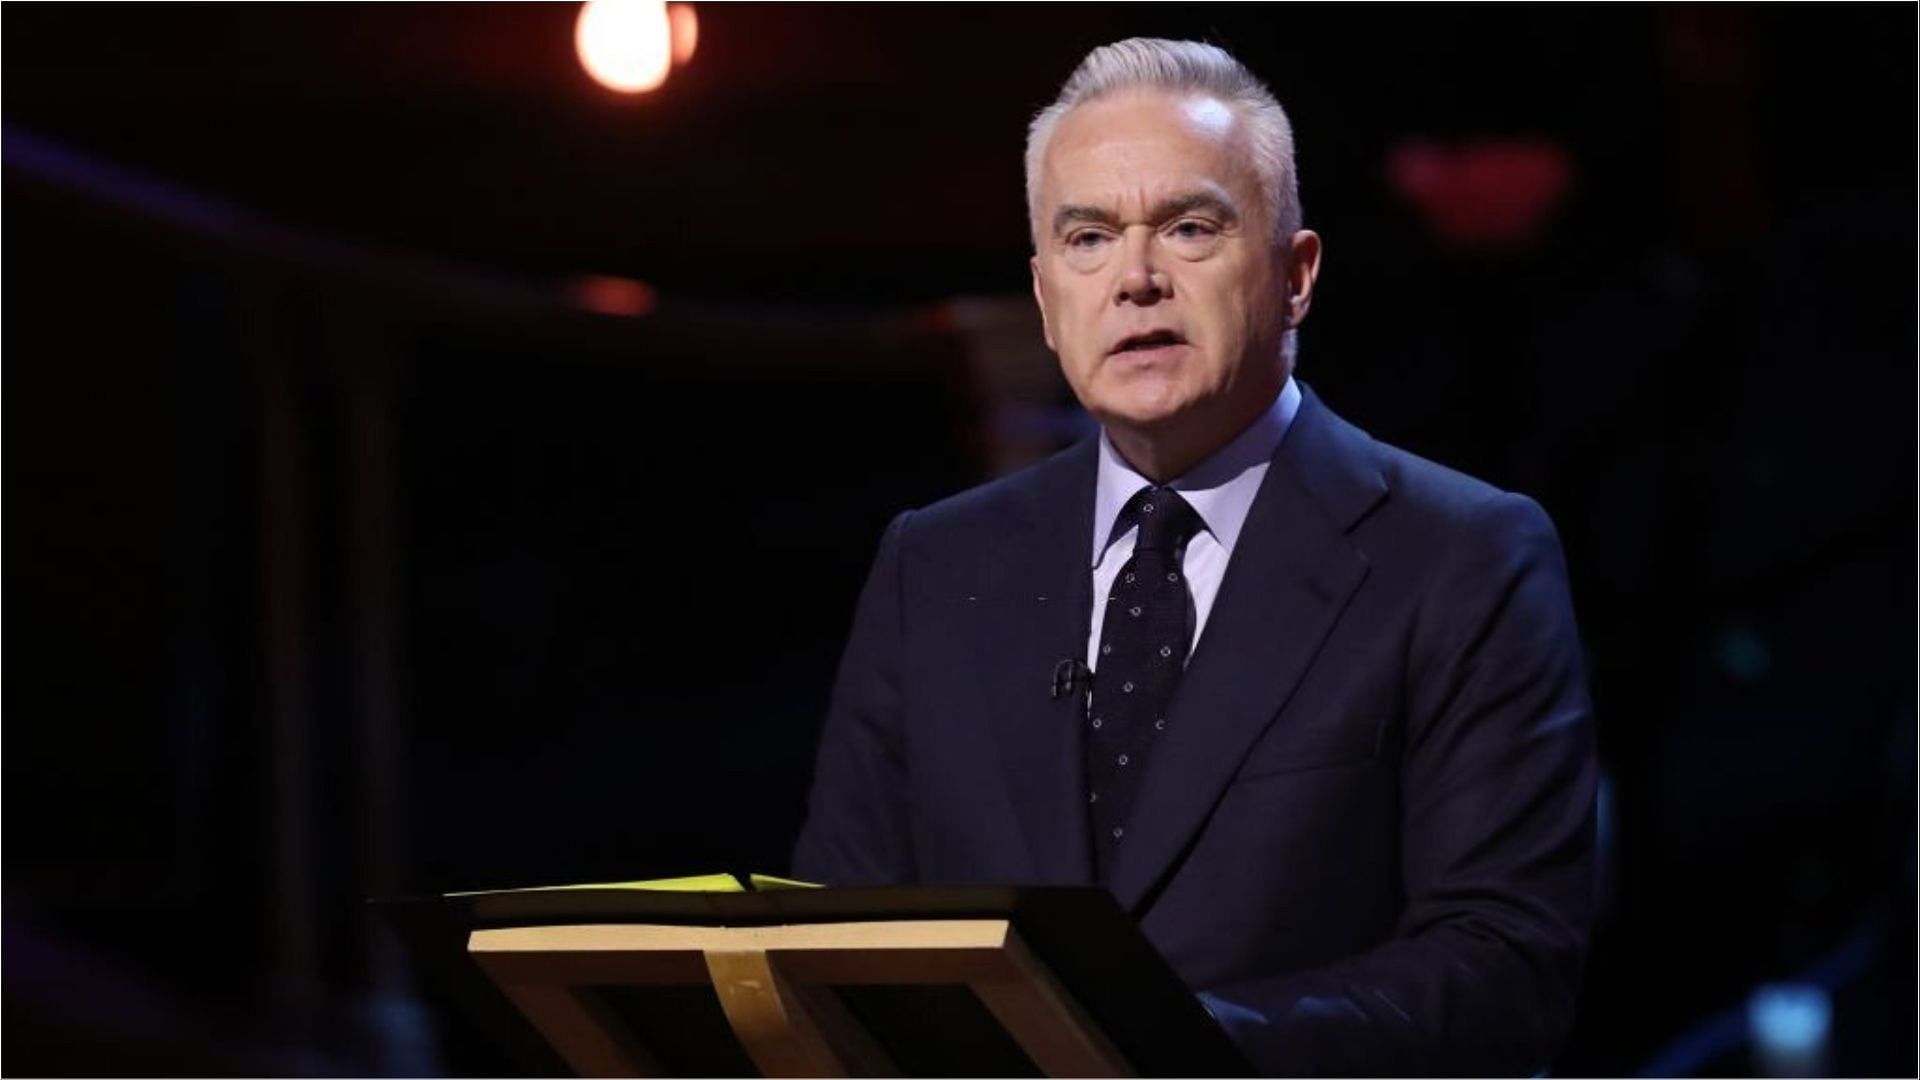 Huw Edwards is believed to be the BBC presenter who was suspended (Image via Chris Jackson/Getty Images)